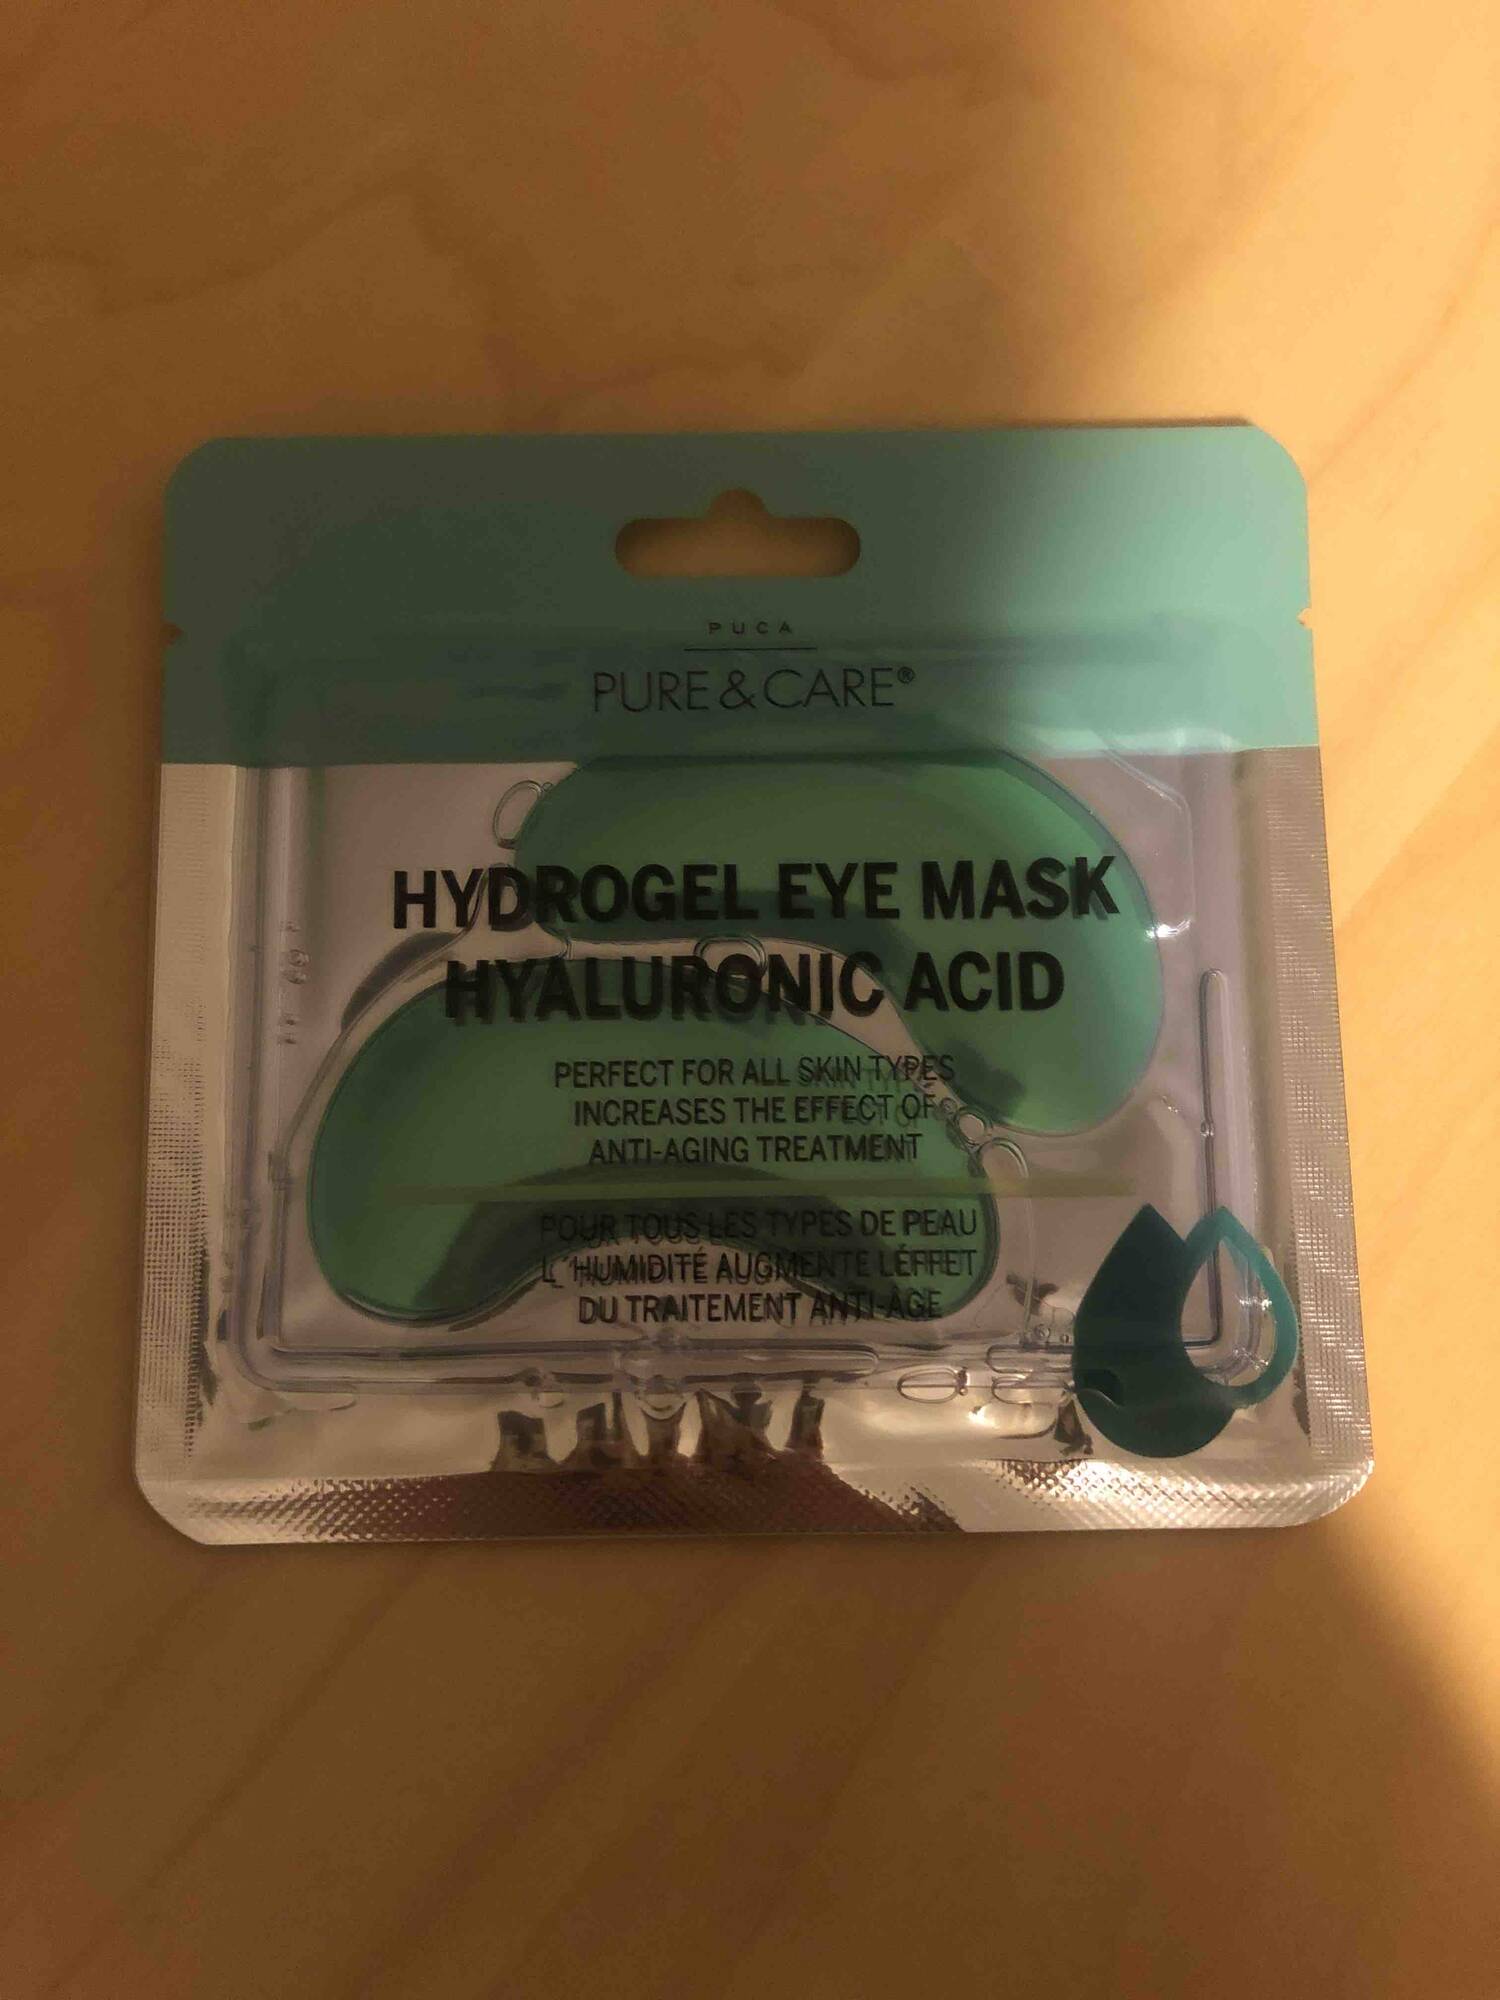 PUCA - Pure & care - Hydrogel eye mask hyaluronic acid